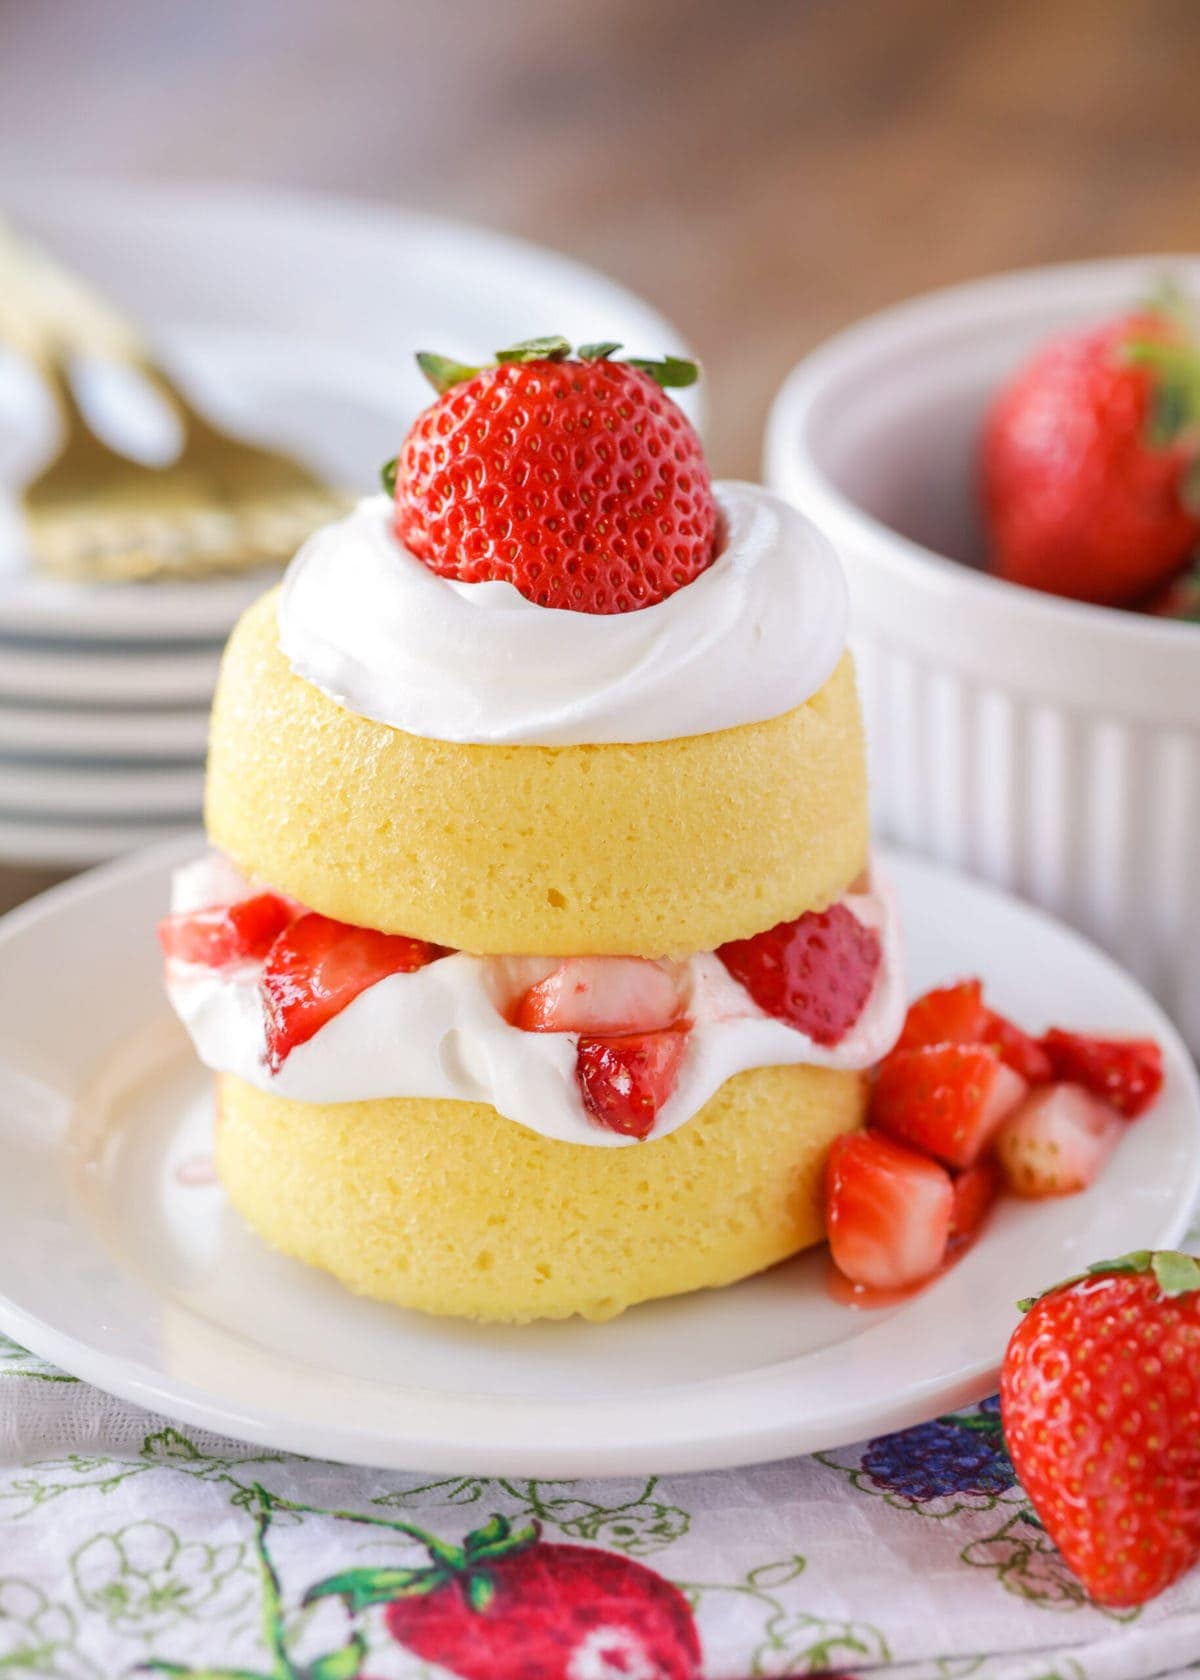 Image of a small strawberry shortcake. Two small round vanilla cake portions stacked with whipped cream and strawberries in between and on the top, more whipped cream and a whole strawberry. Some cut up strawberries on the side of the plate.